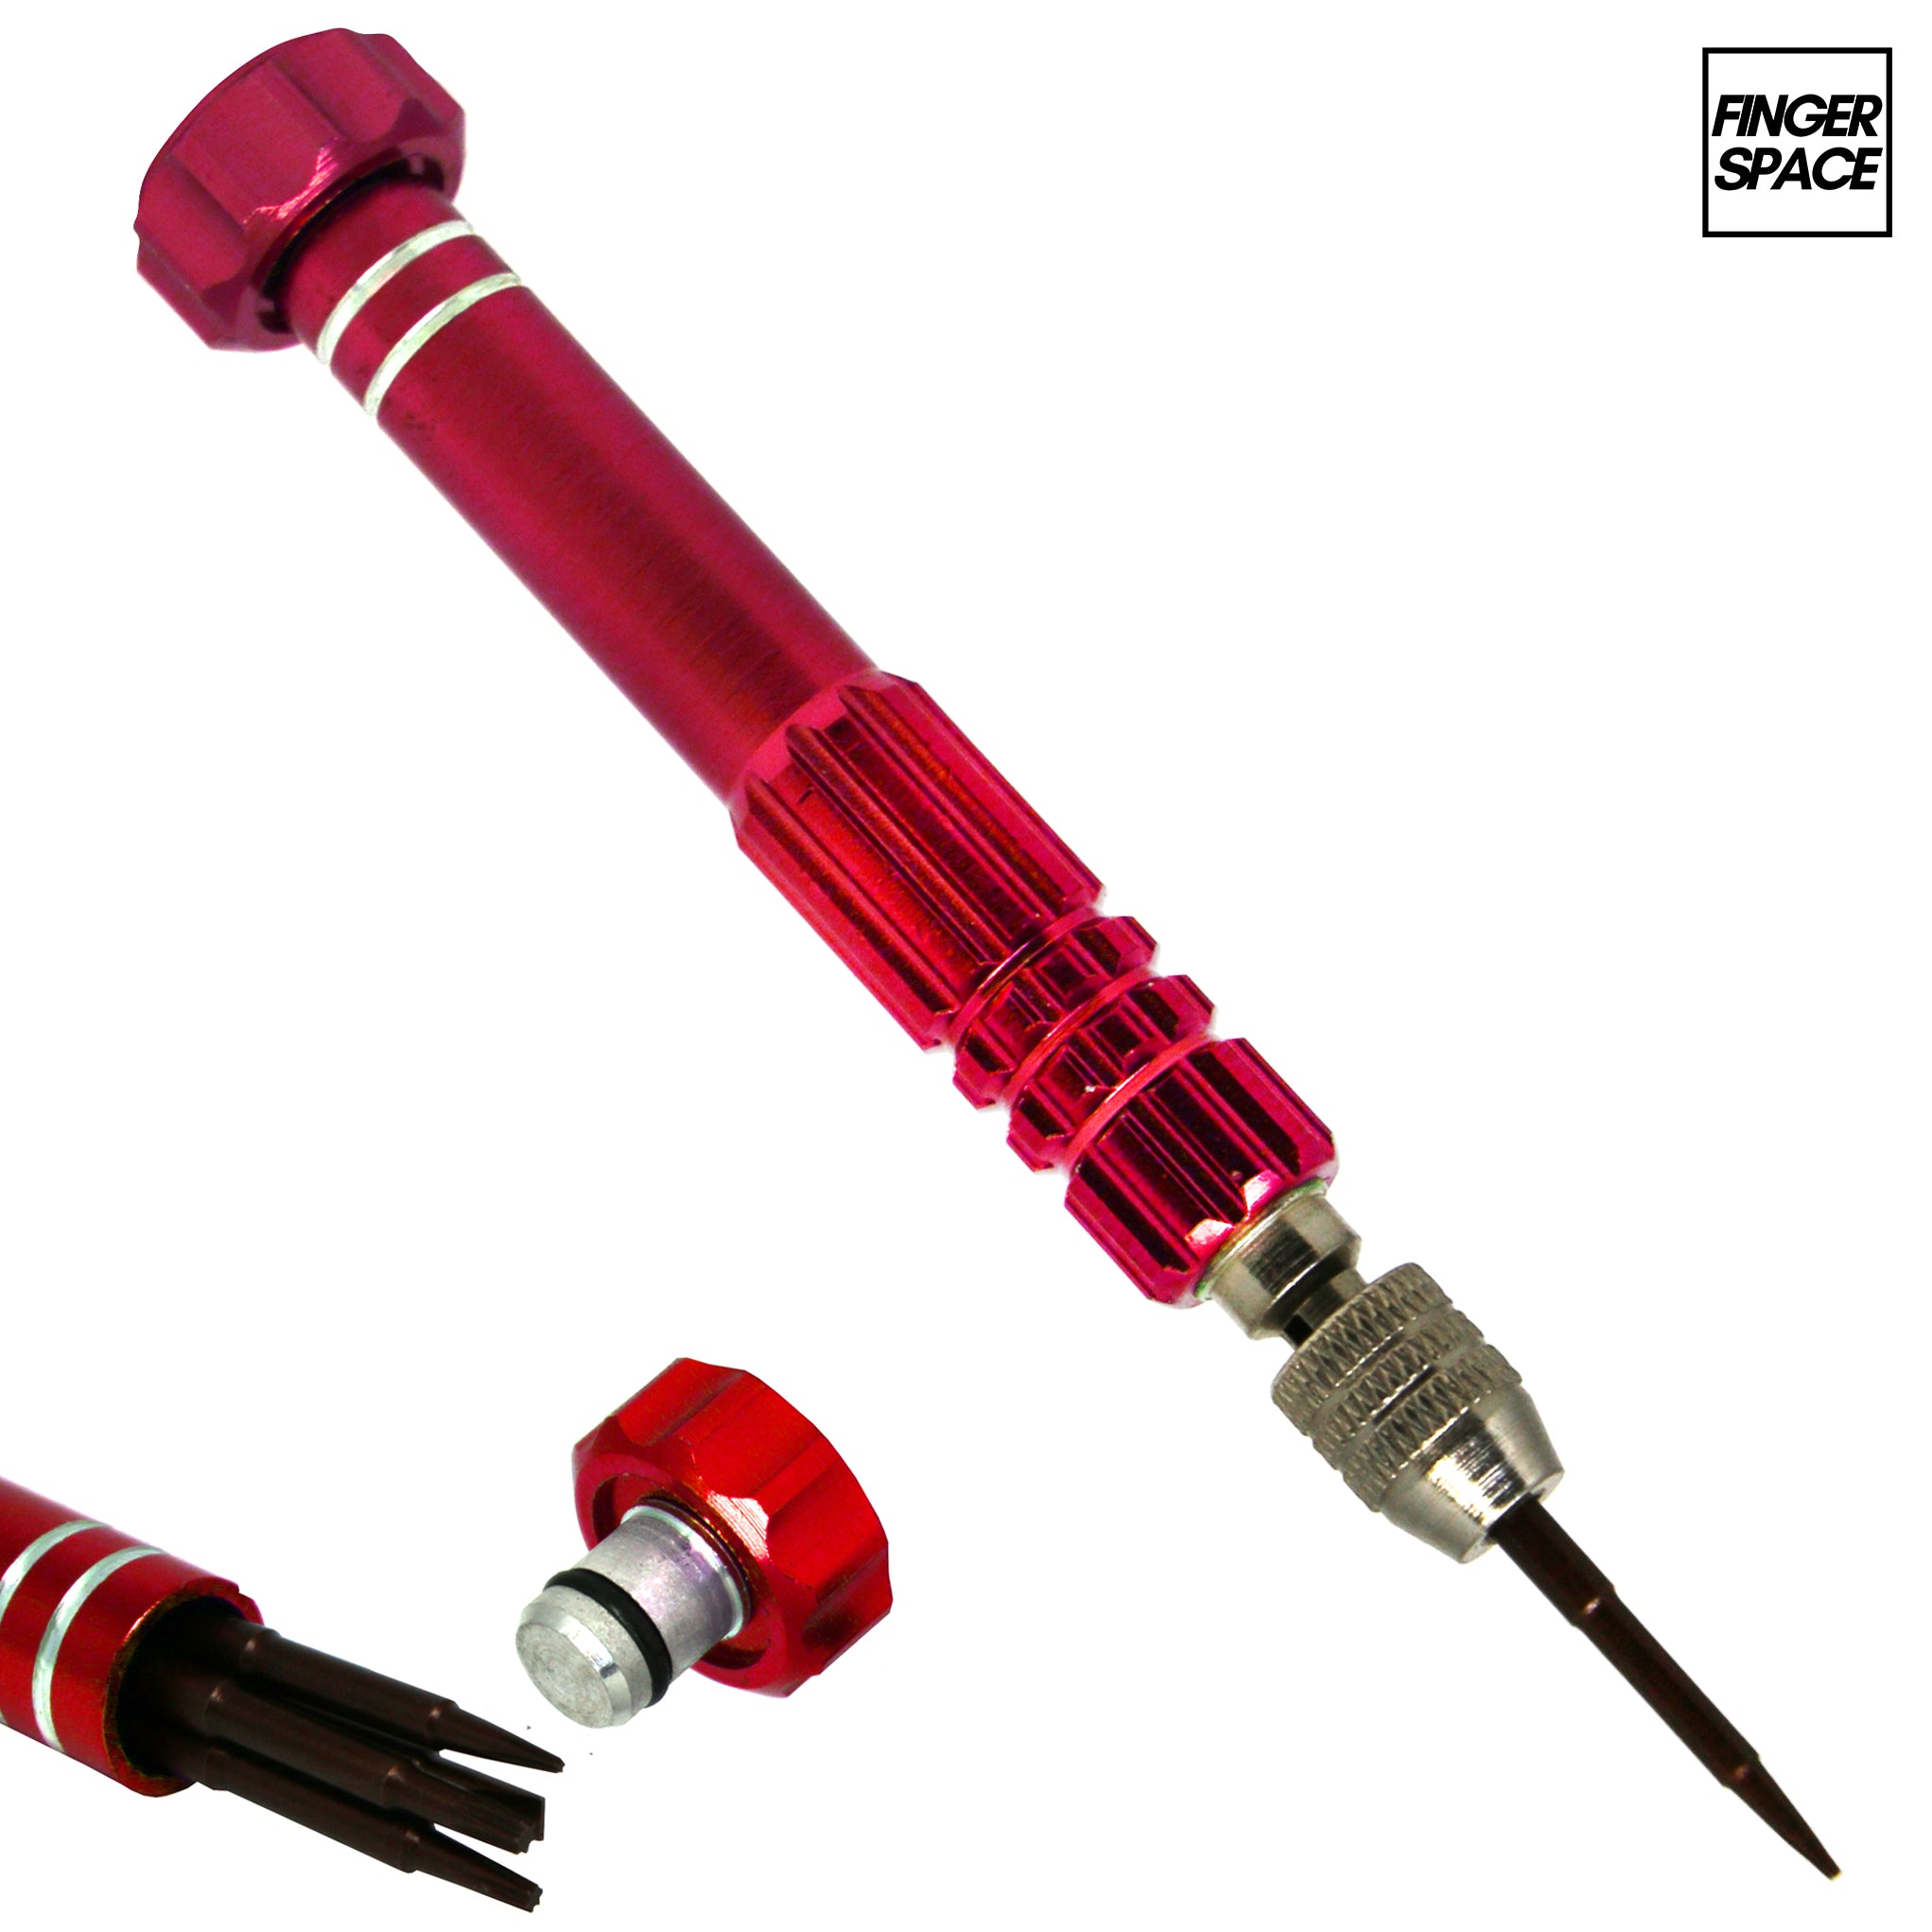 Professional Red Tool with Interchangeable Screw Bits